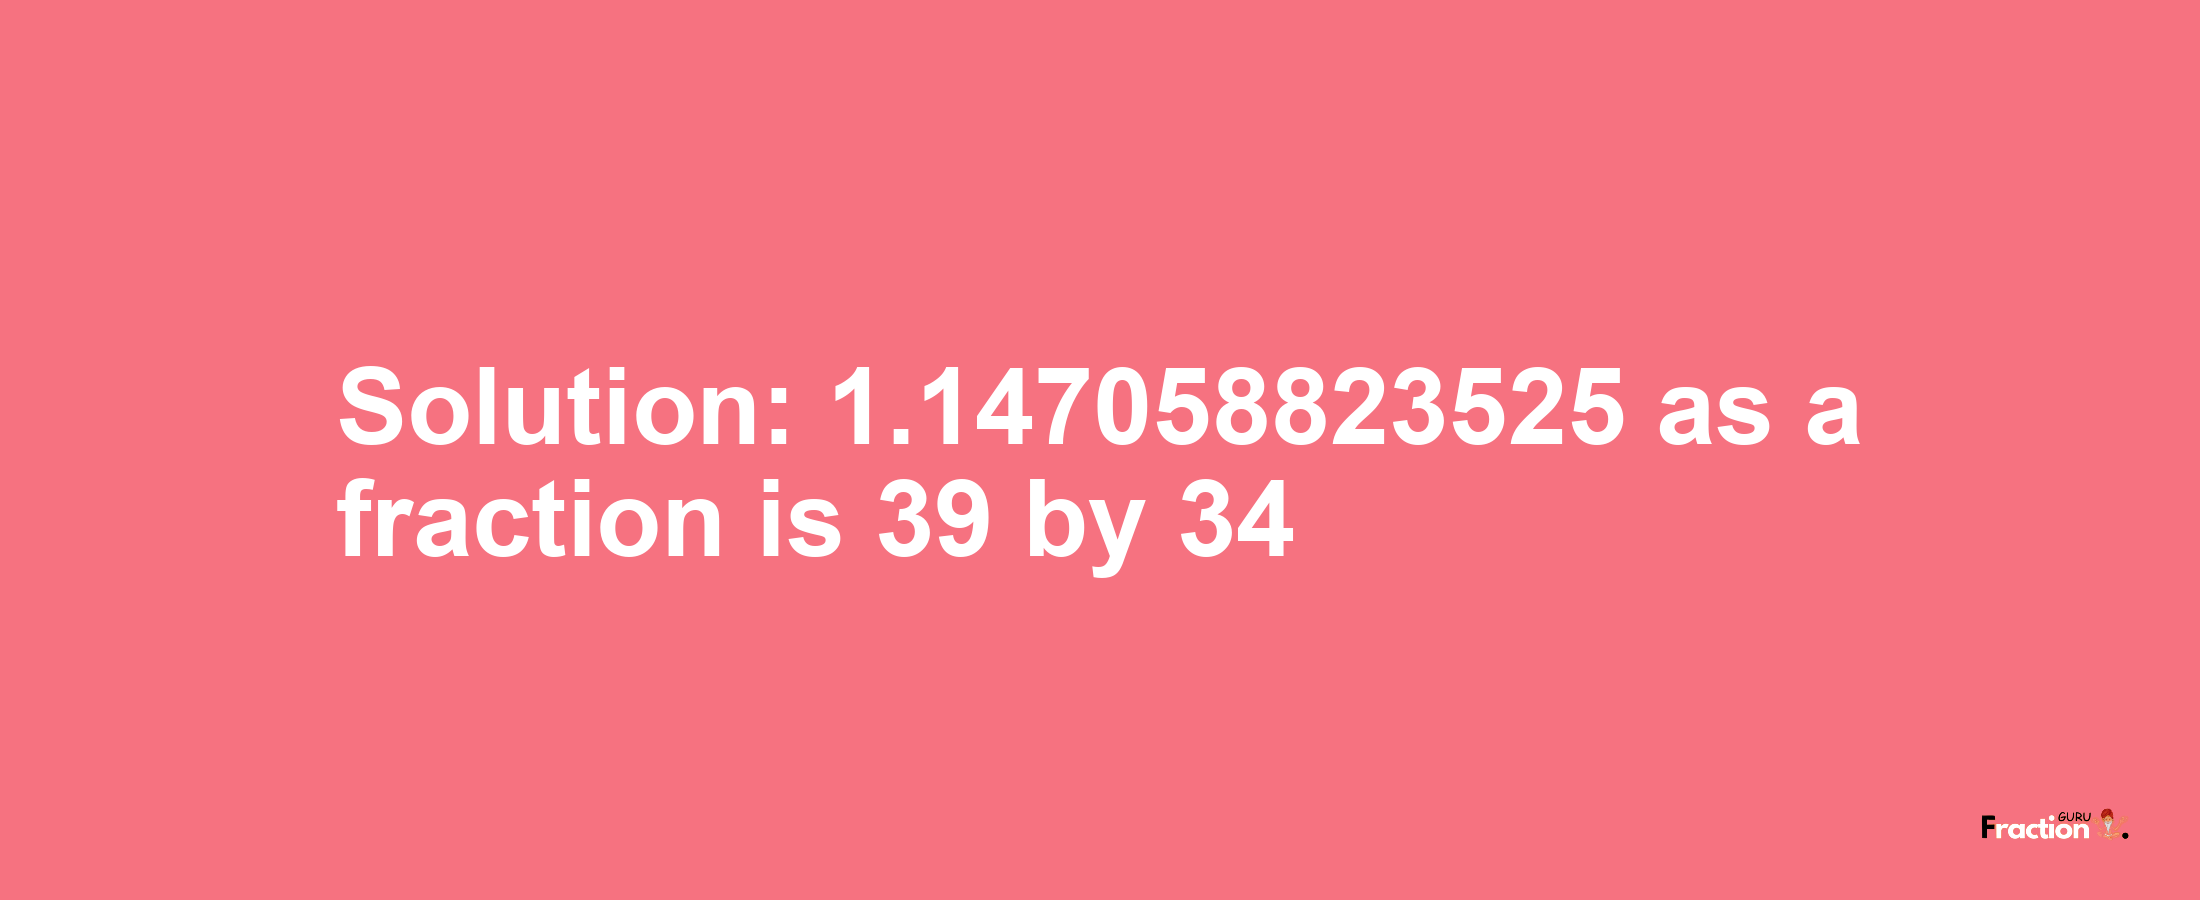 Solution:1.147058823525 as a fraction is 39/34